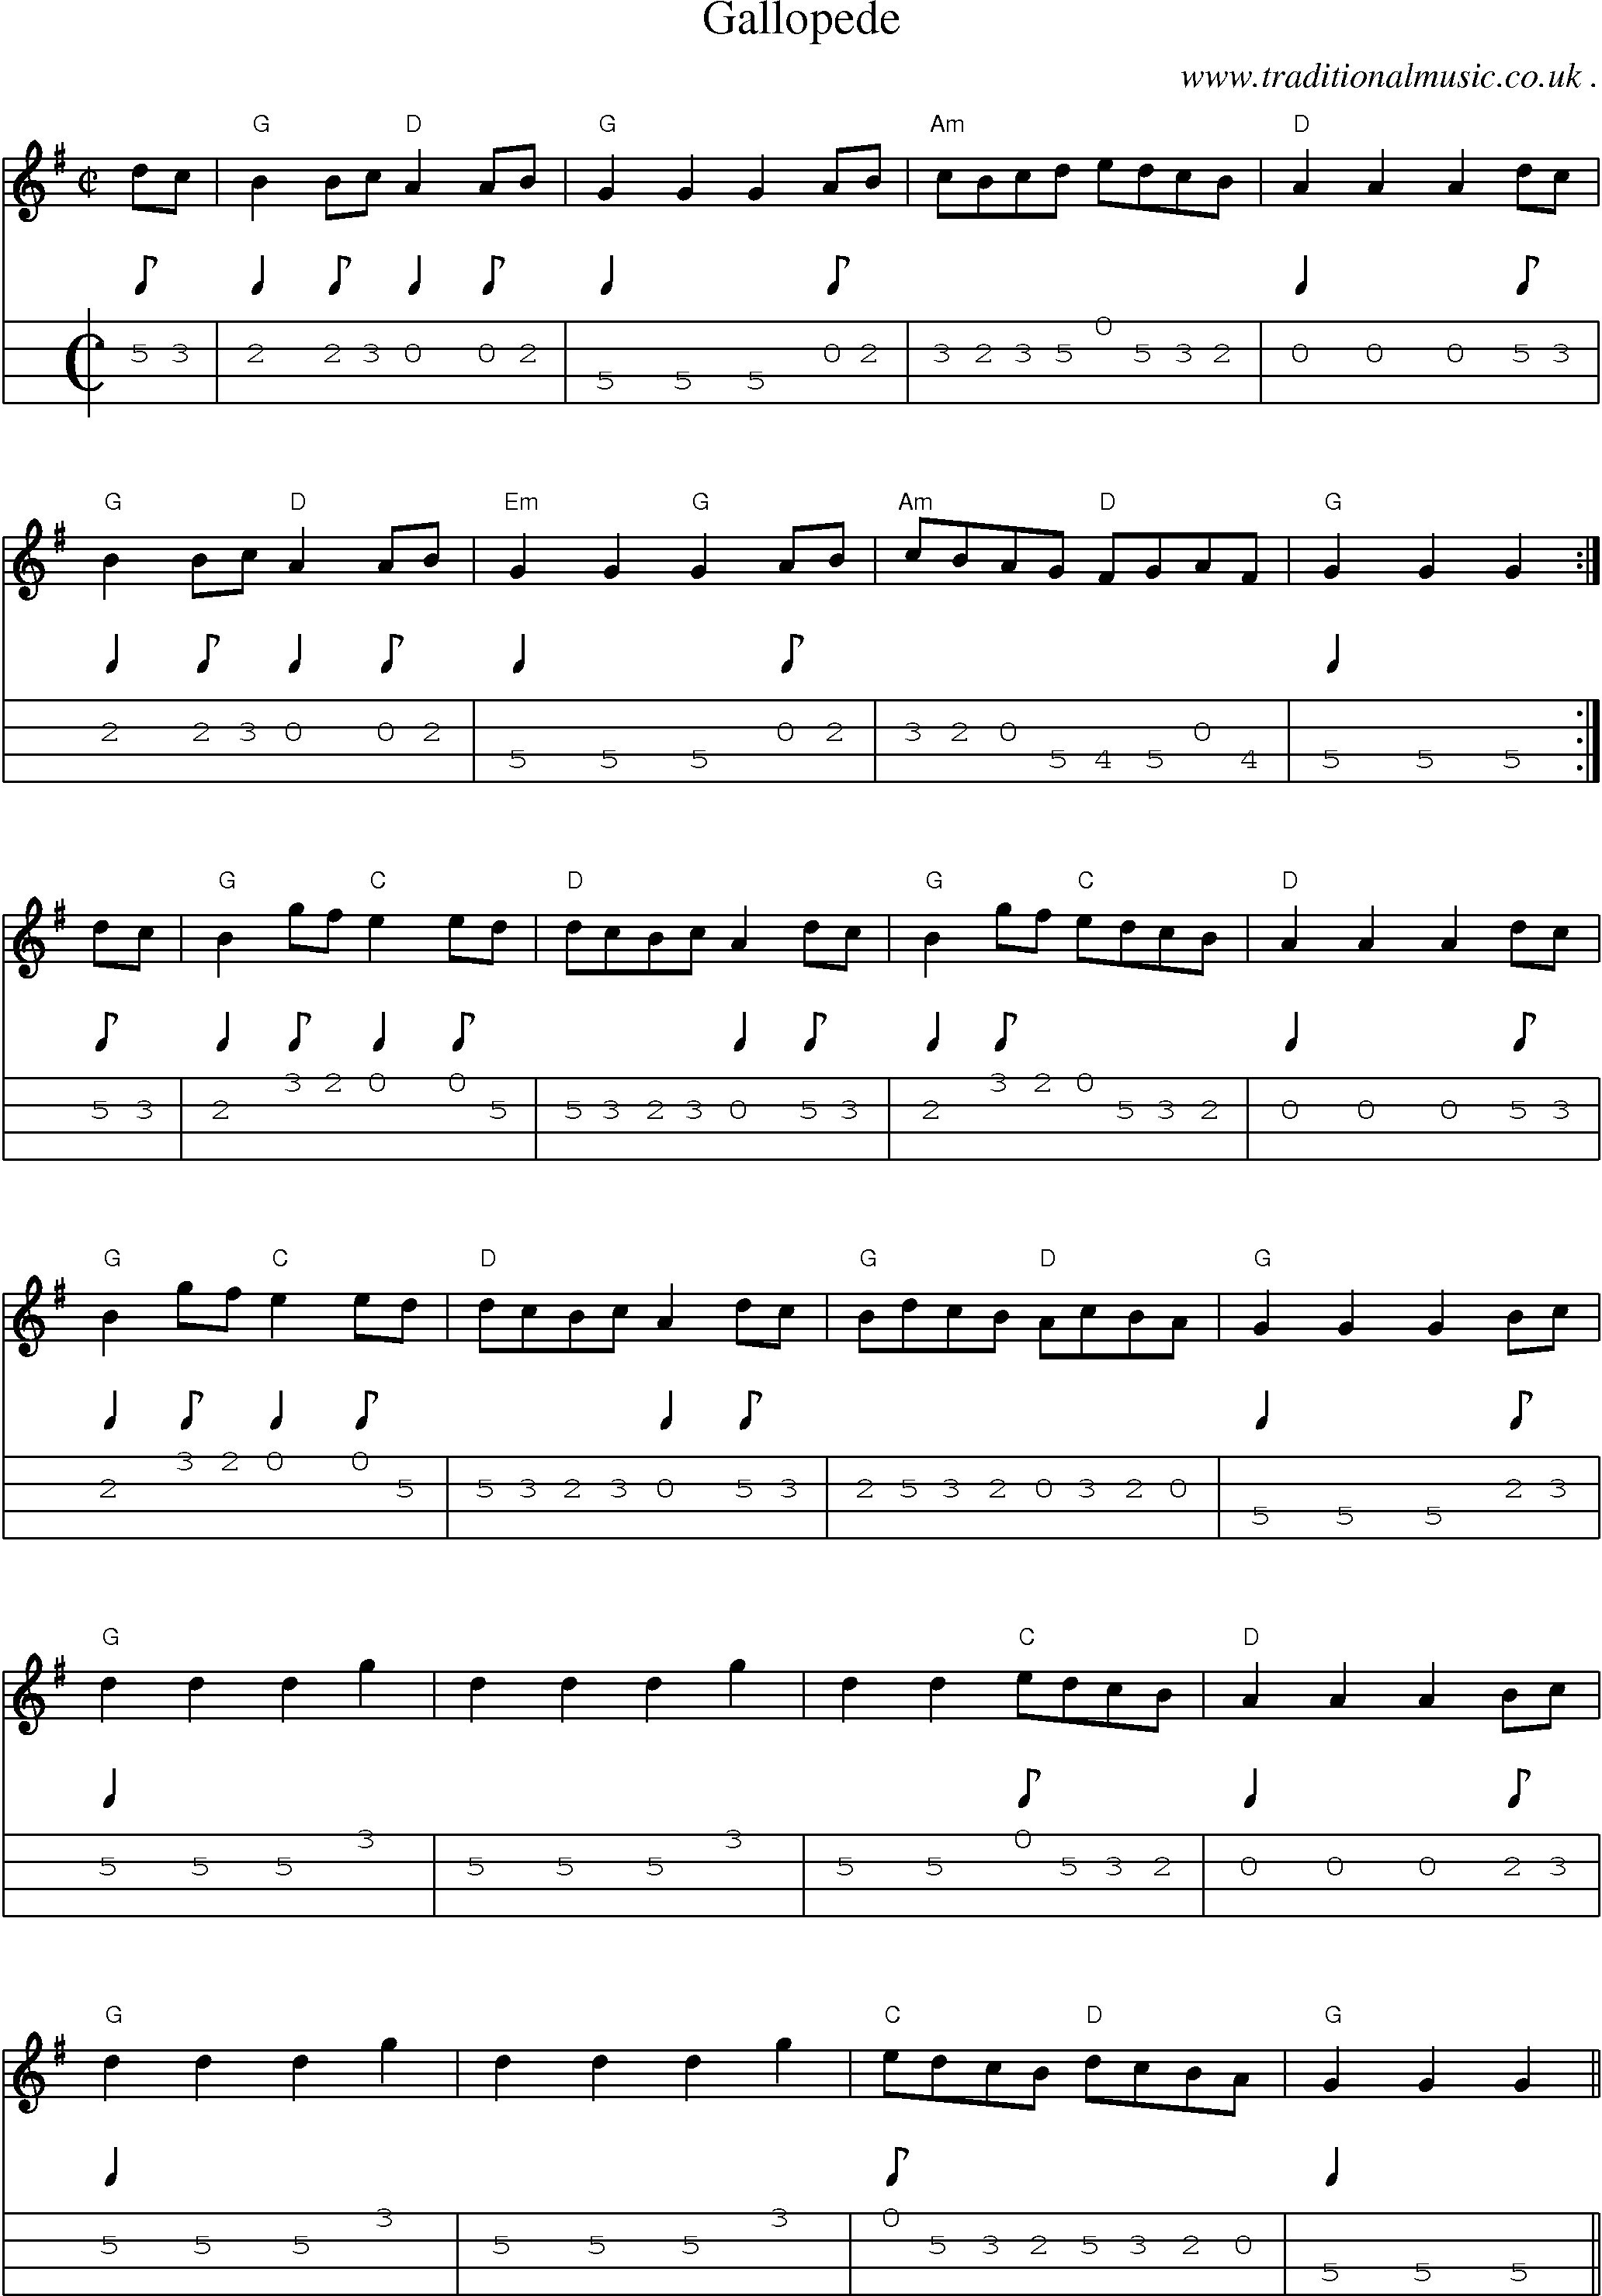 Music Score and Guitar Tabs for Gallopede